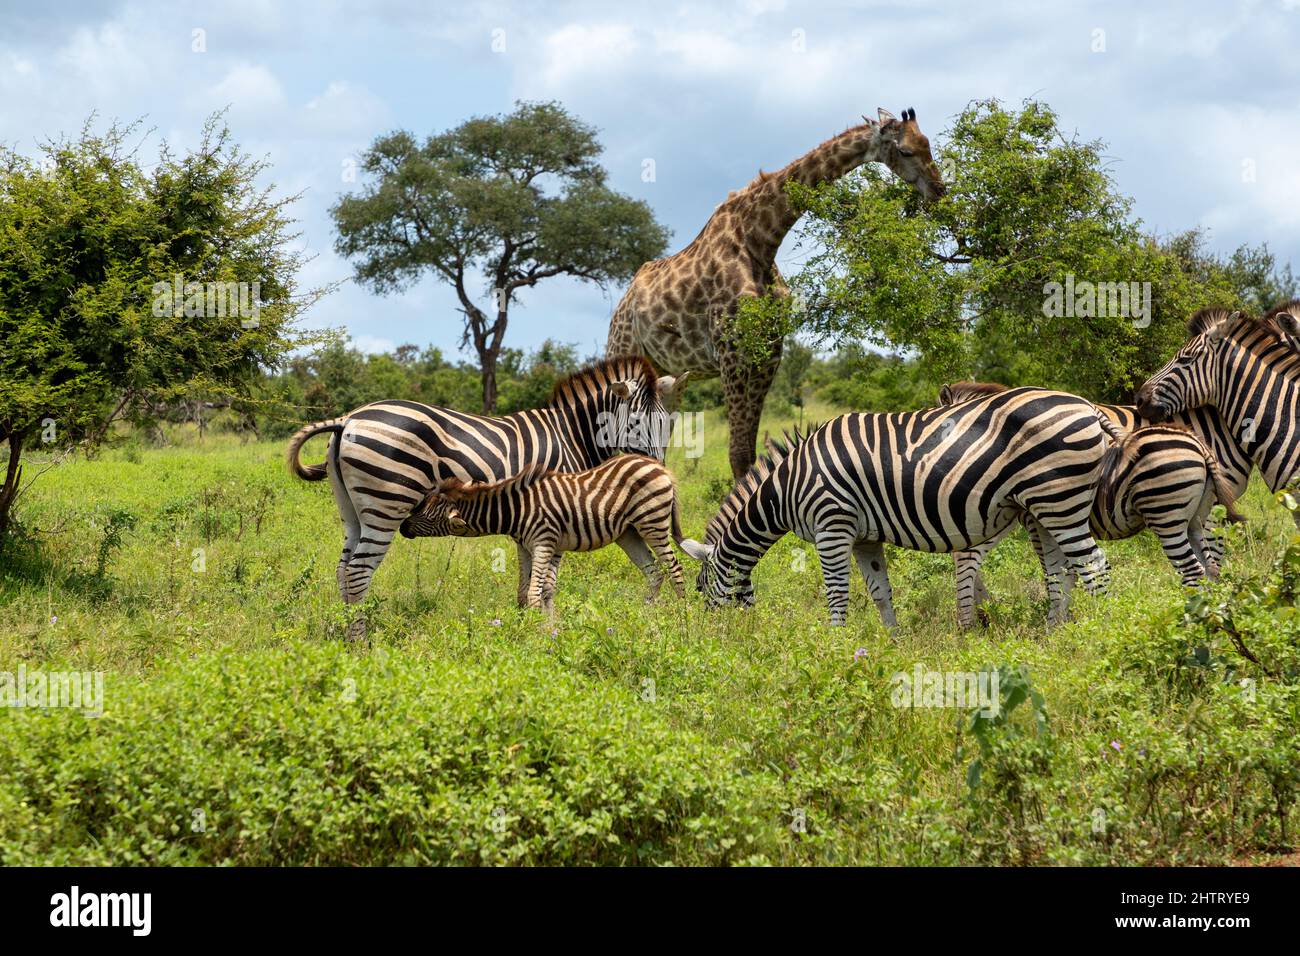 Herd of Zebras grazing in the african bush. In the background a giraffe is eating leaves from an acacia tree Stock Photo